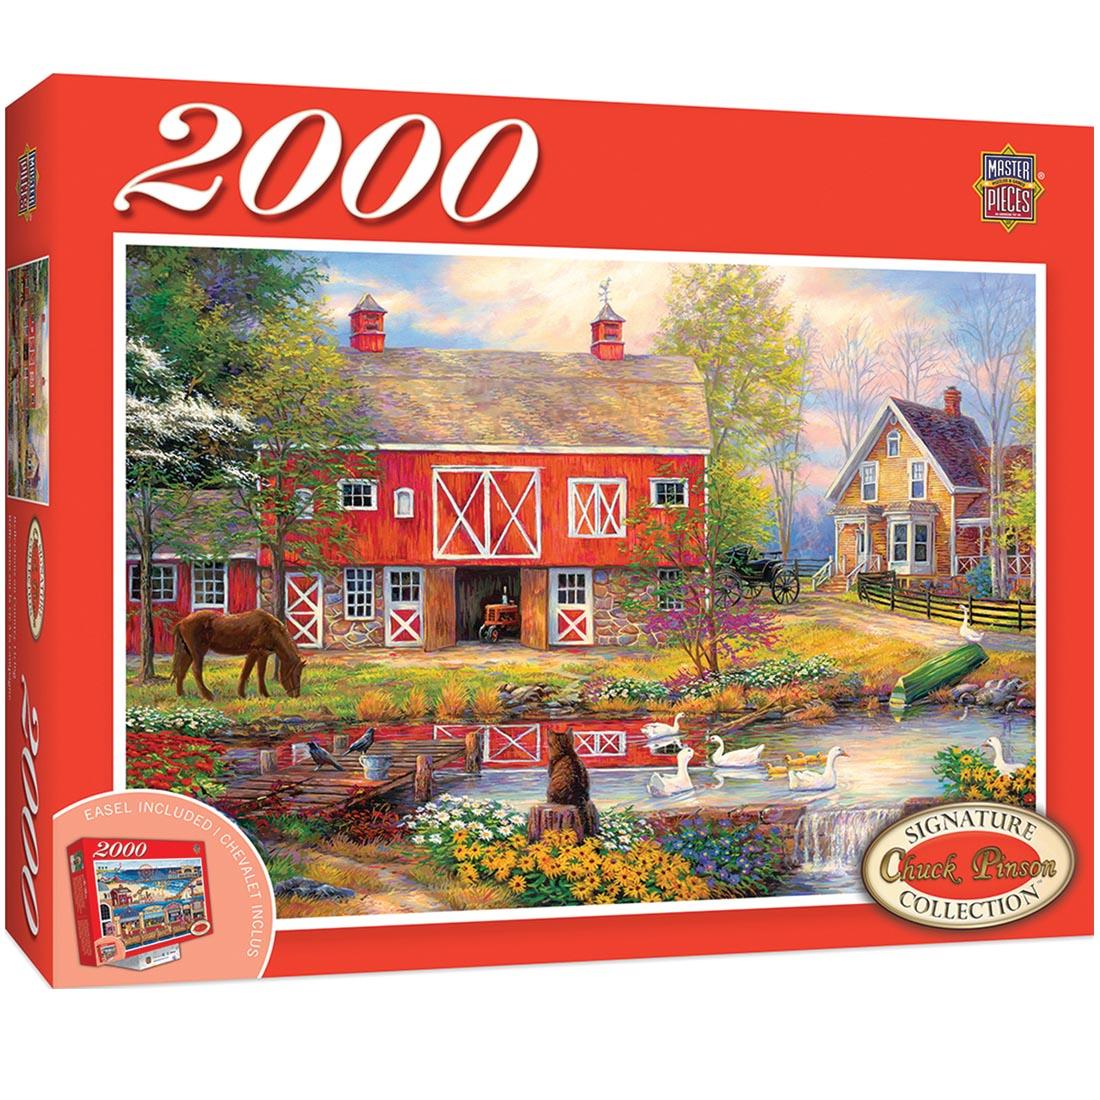 Signature Collection Reflections On Country Living 2000-Piece Puzzle by MasterPieces